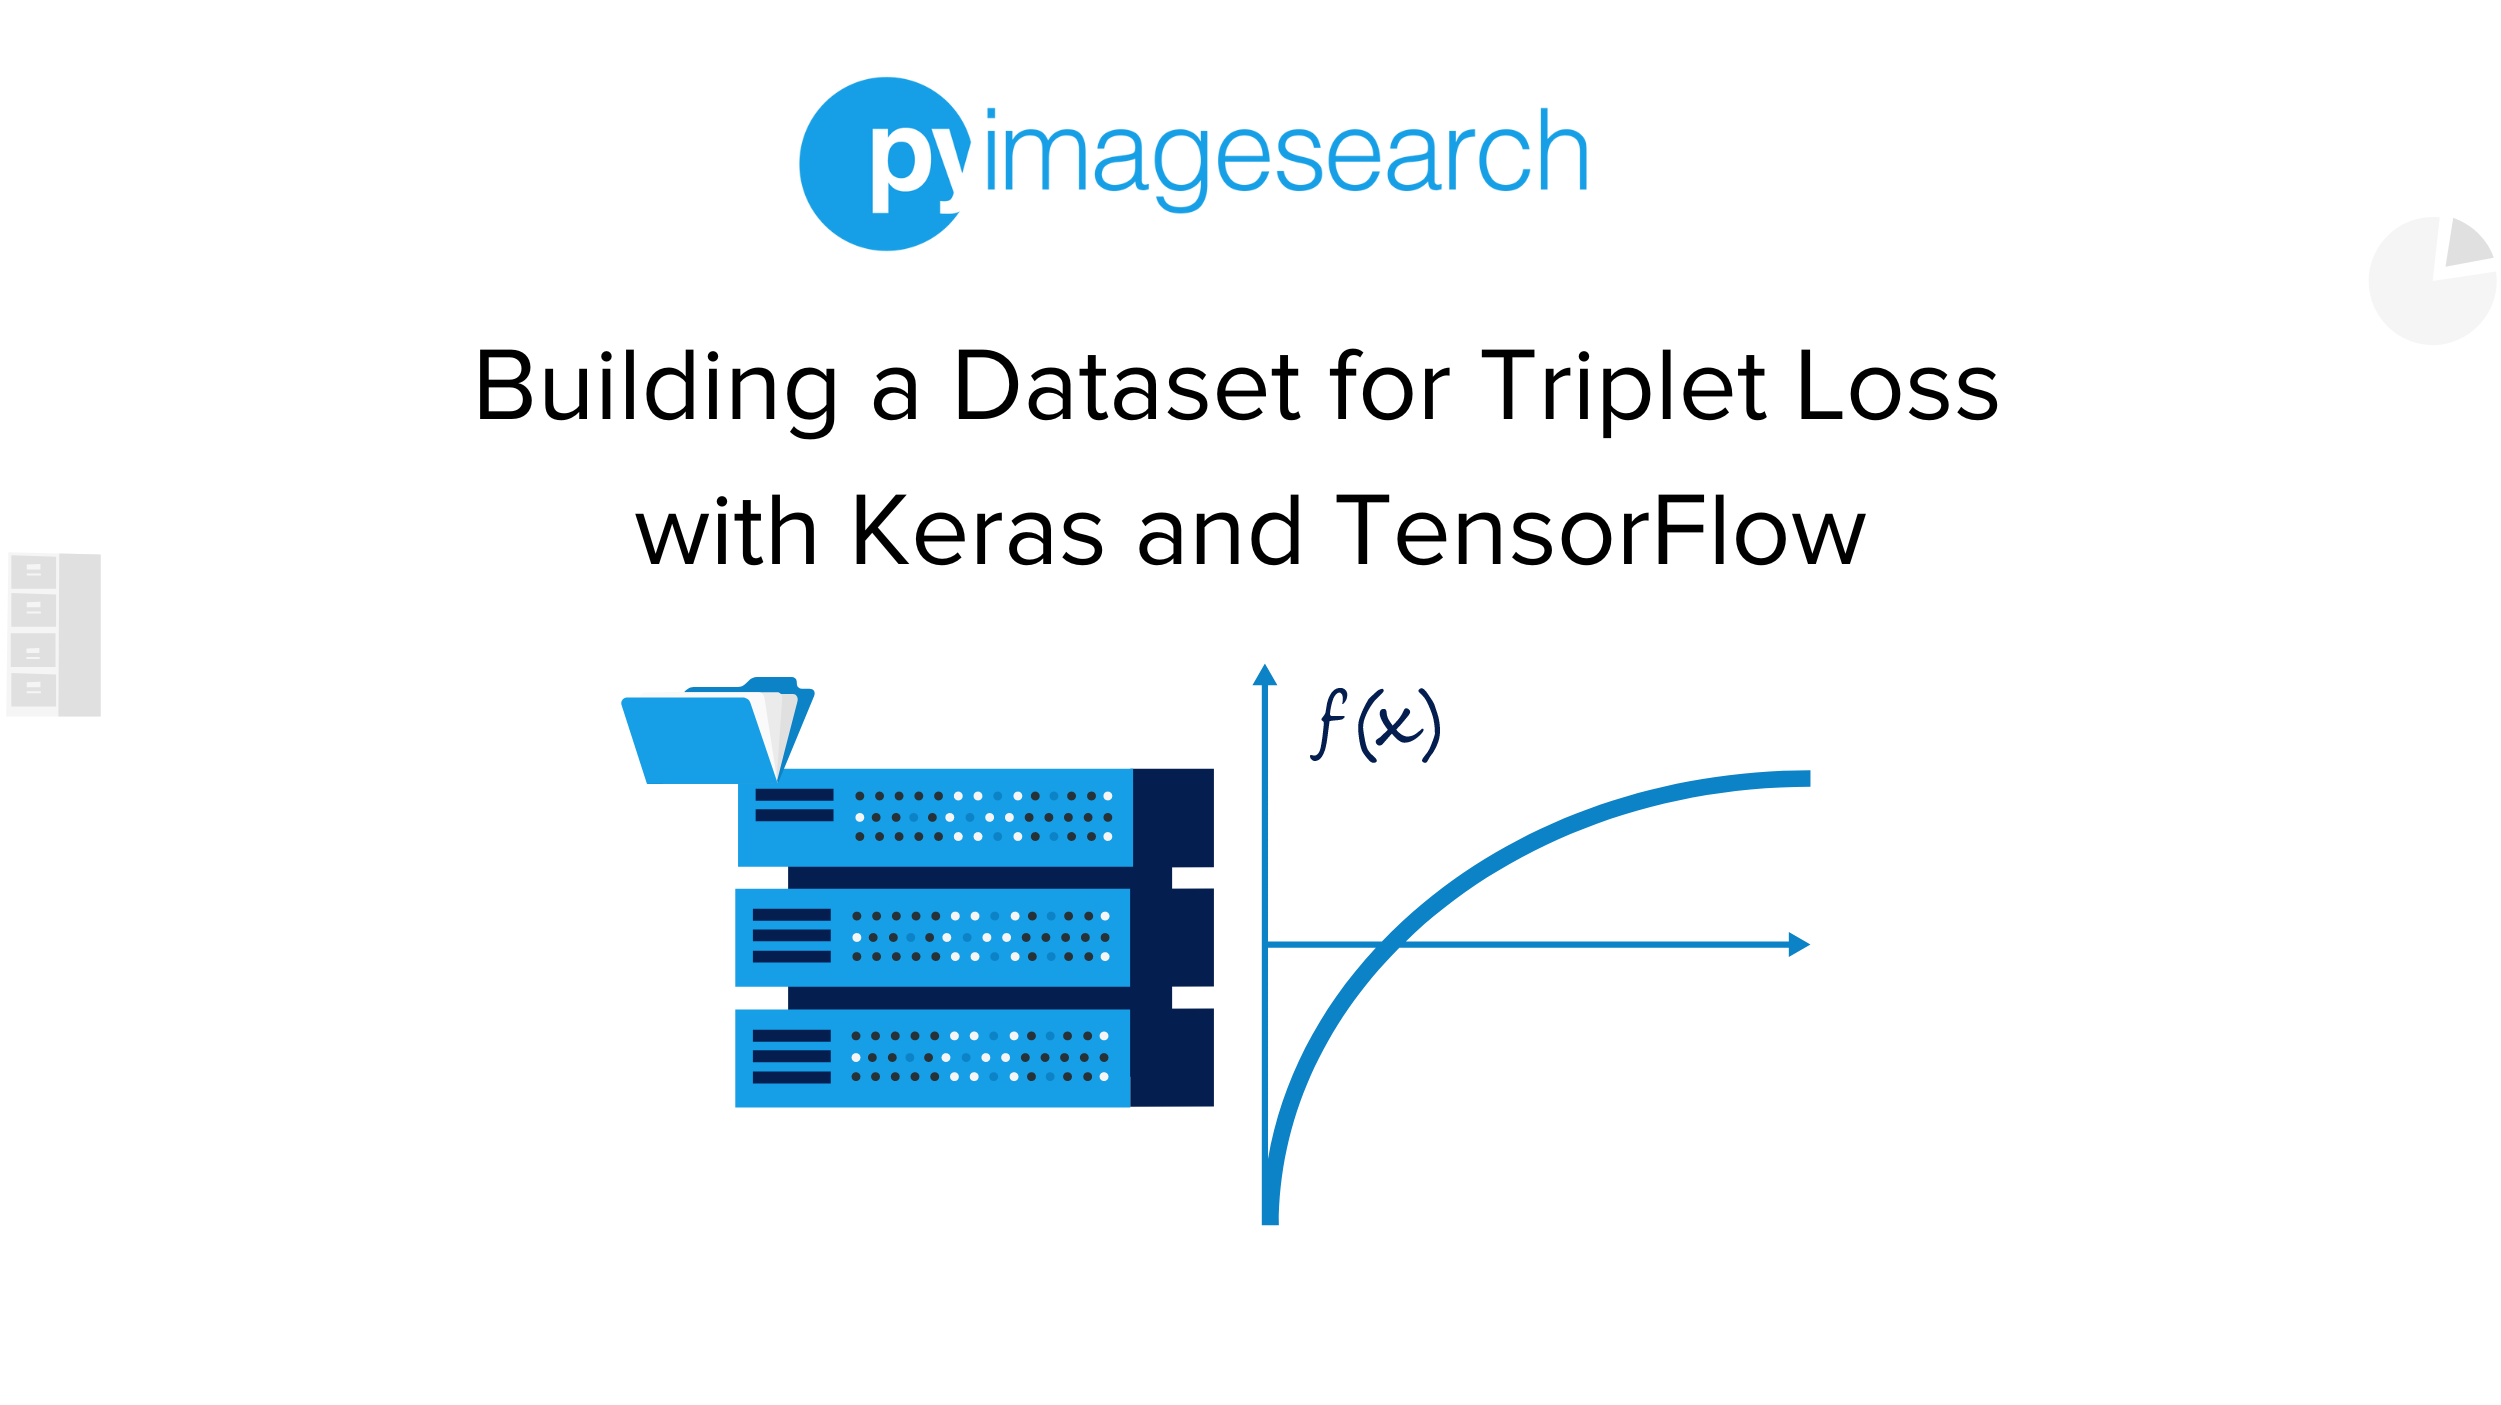 Building a Dataset for Triplet Loss with Keras and TensorFlow